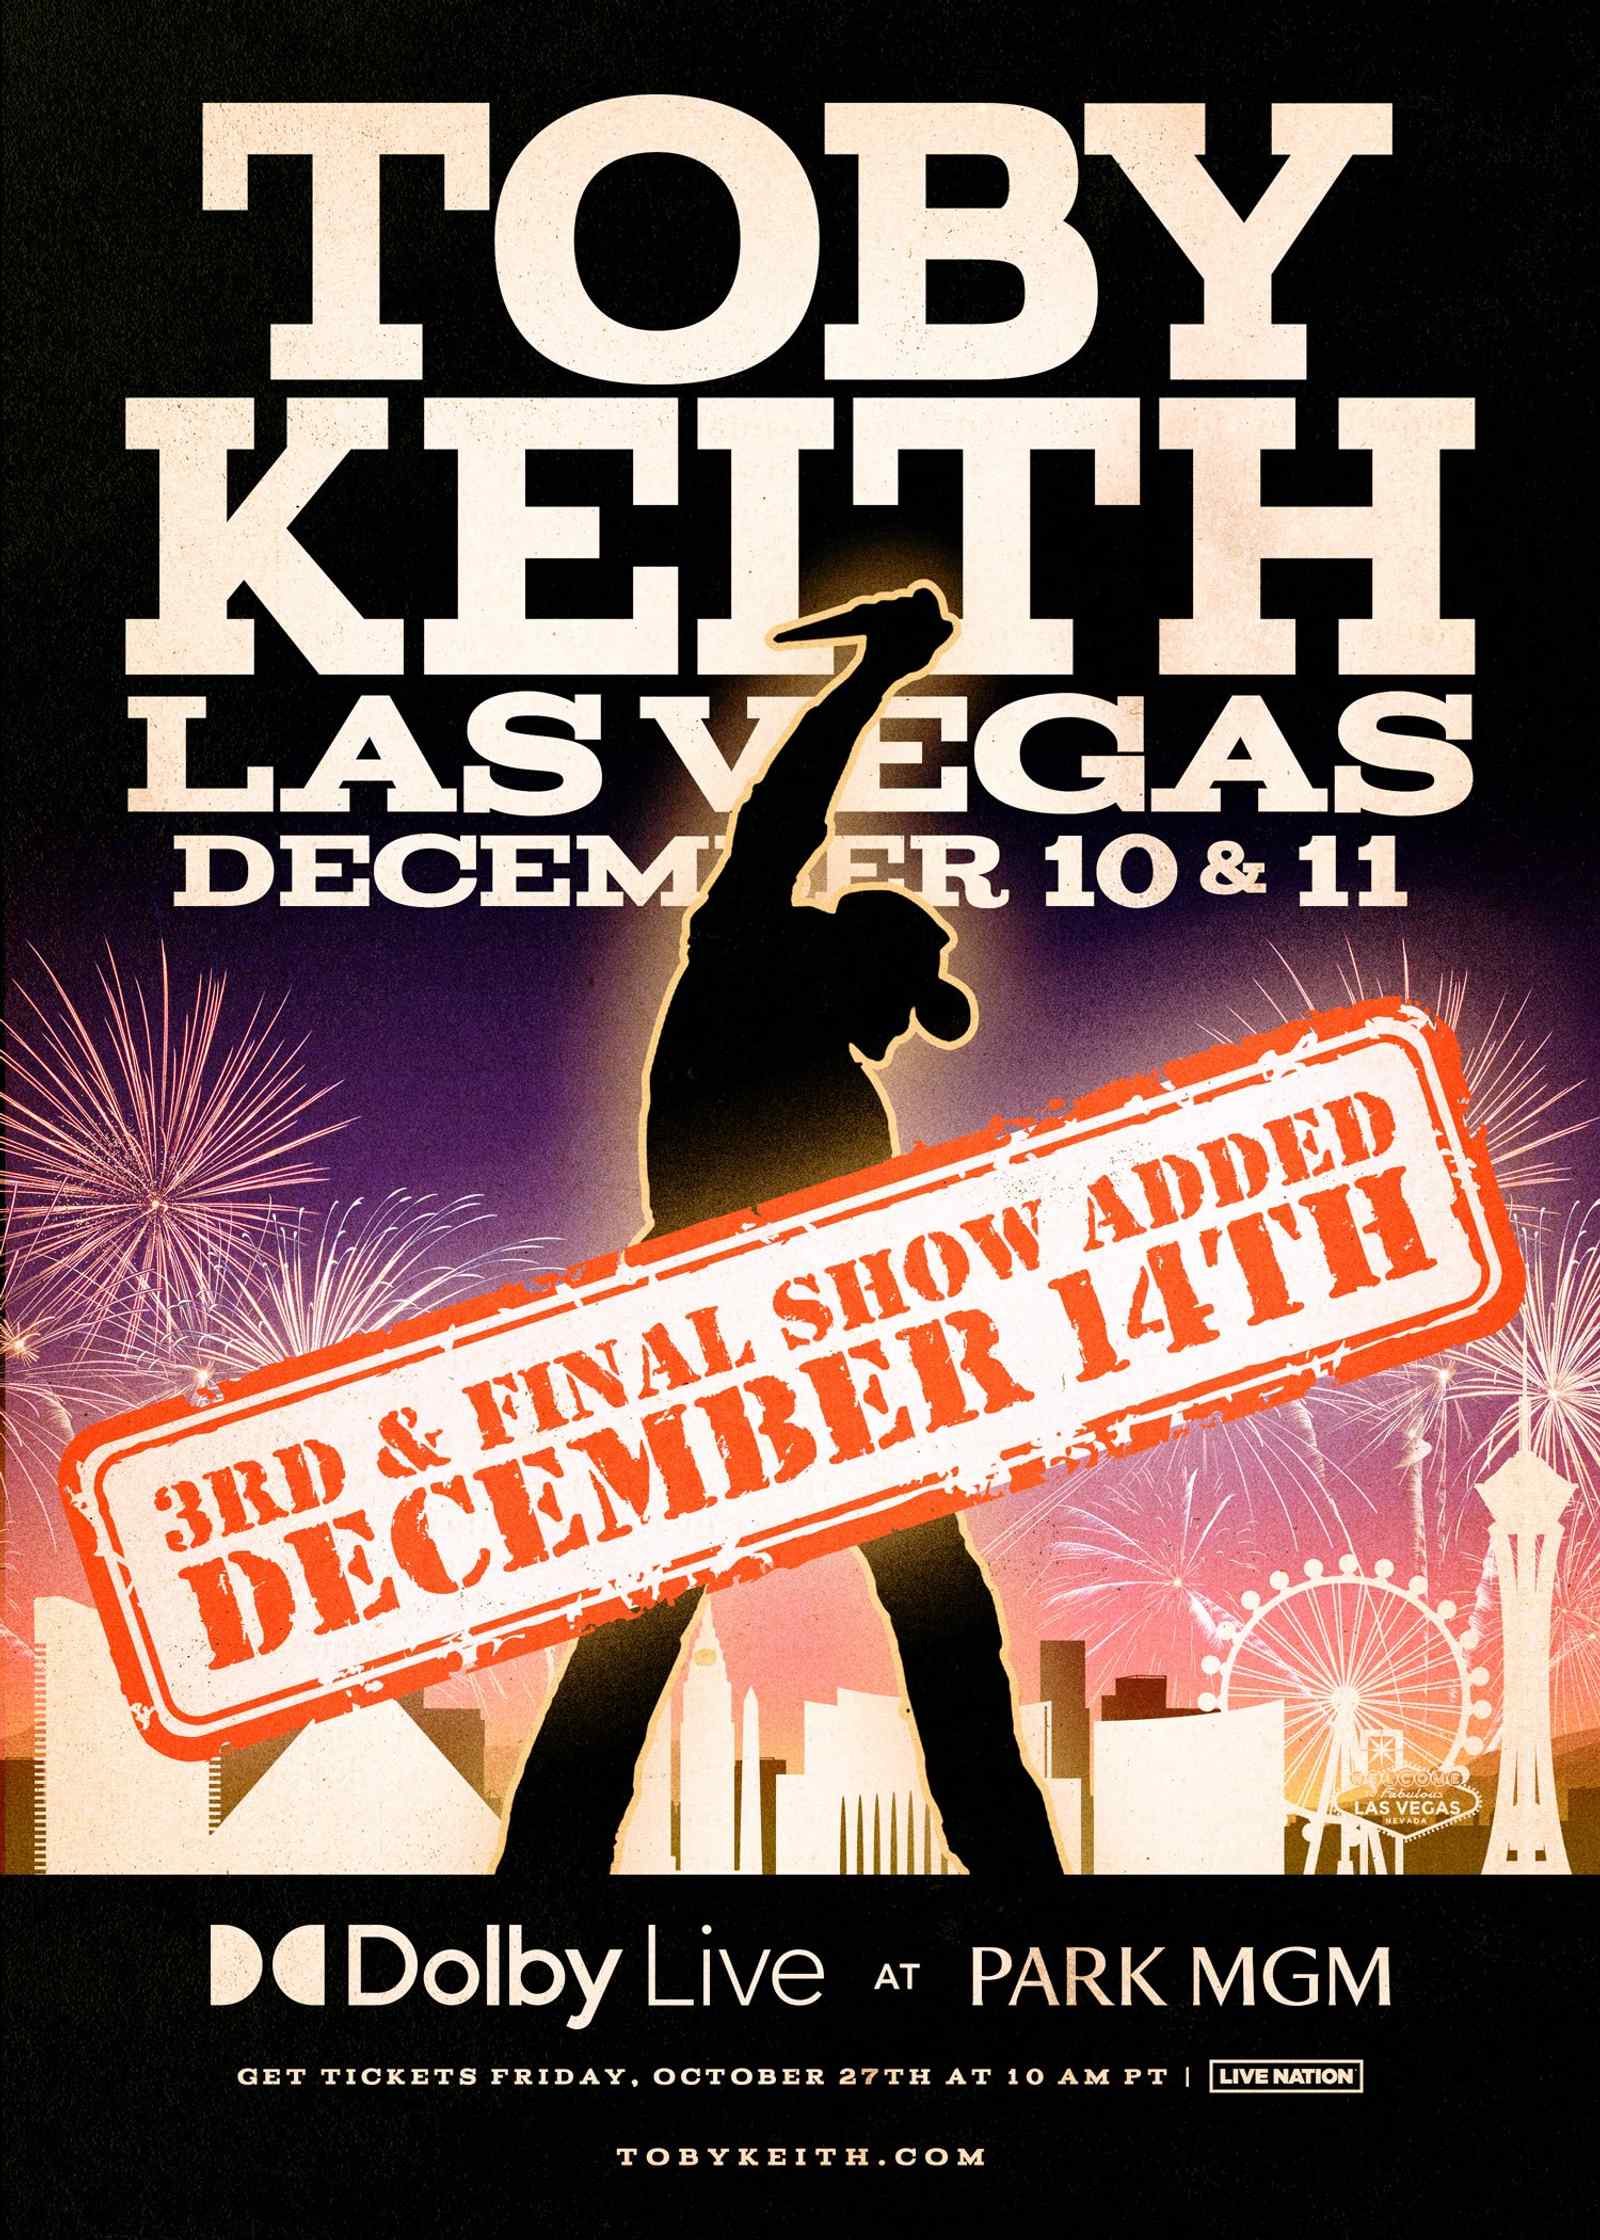 Toby Keith Adds Third Headlining Show  Last to be Scheduled For Las Vegas Run